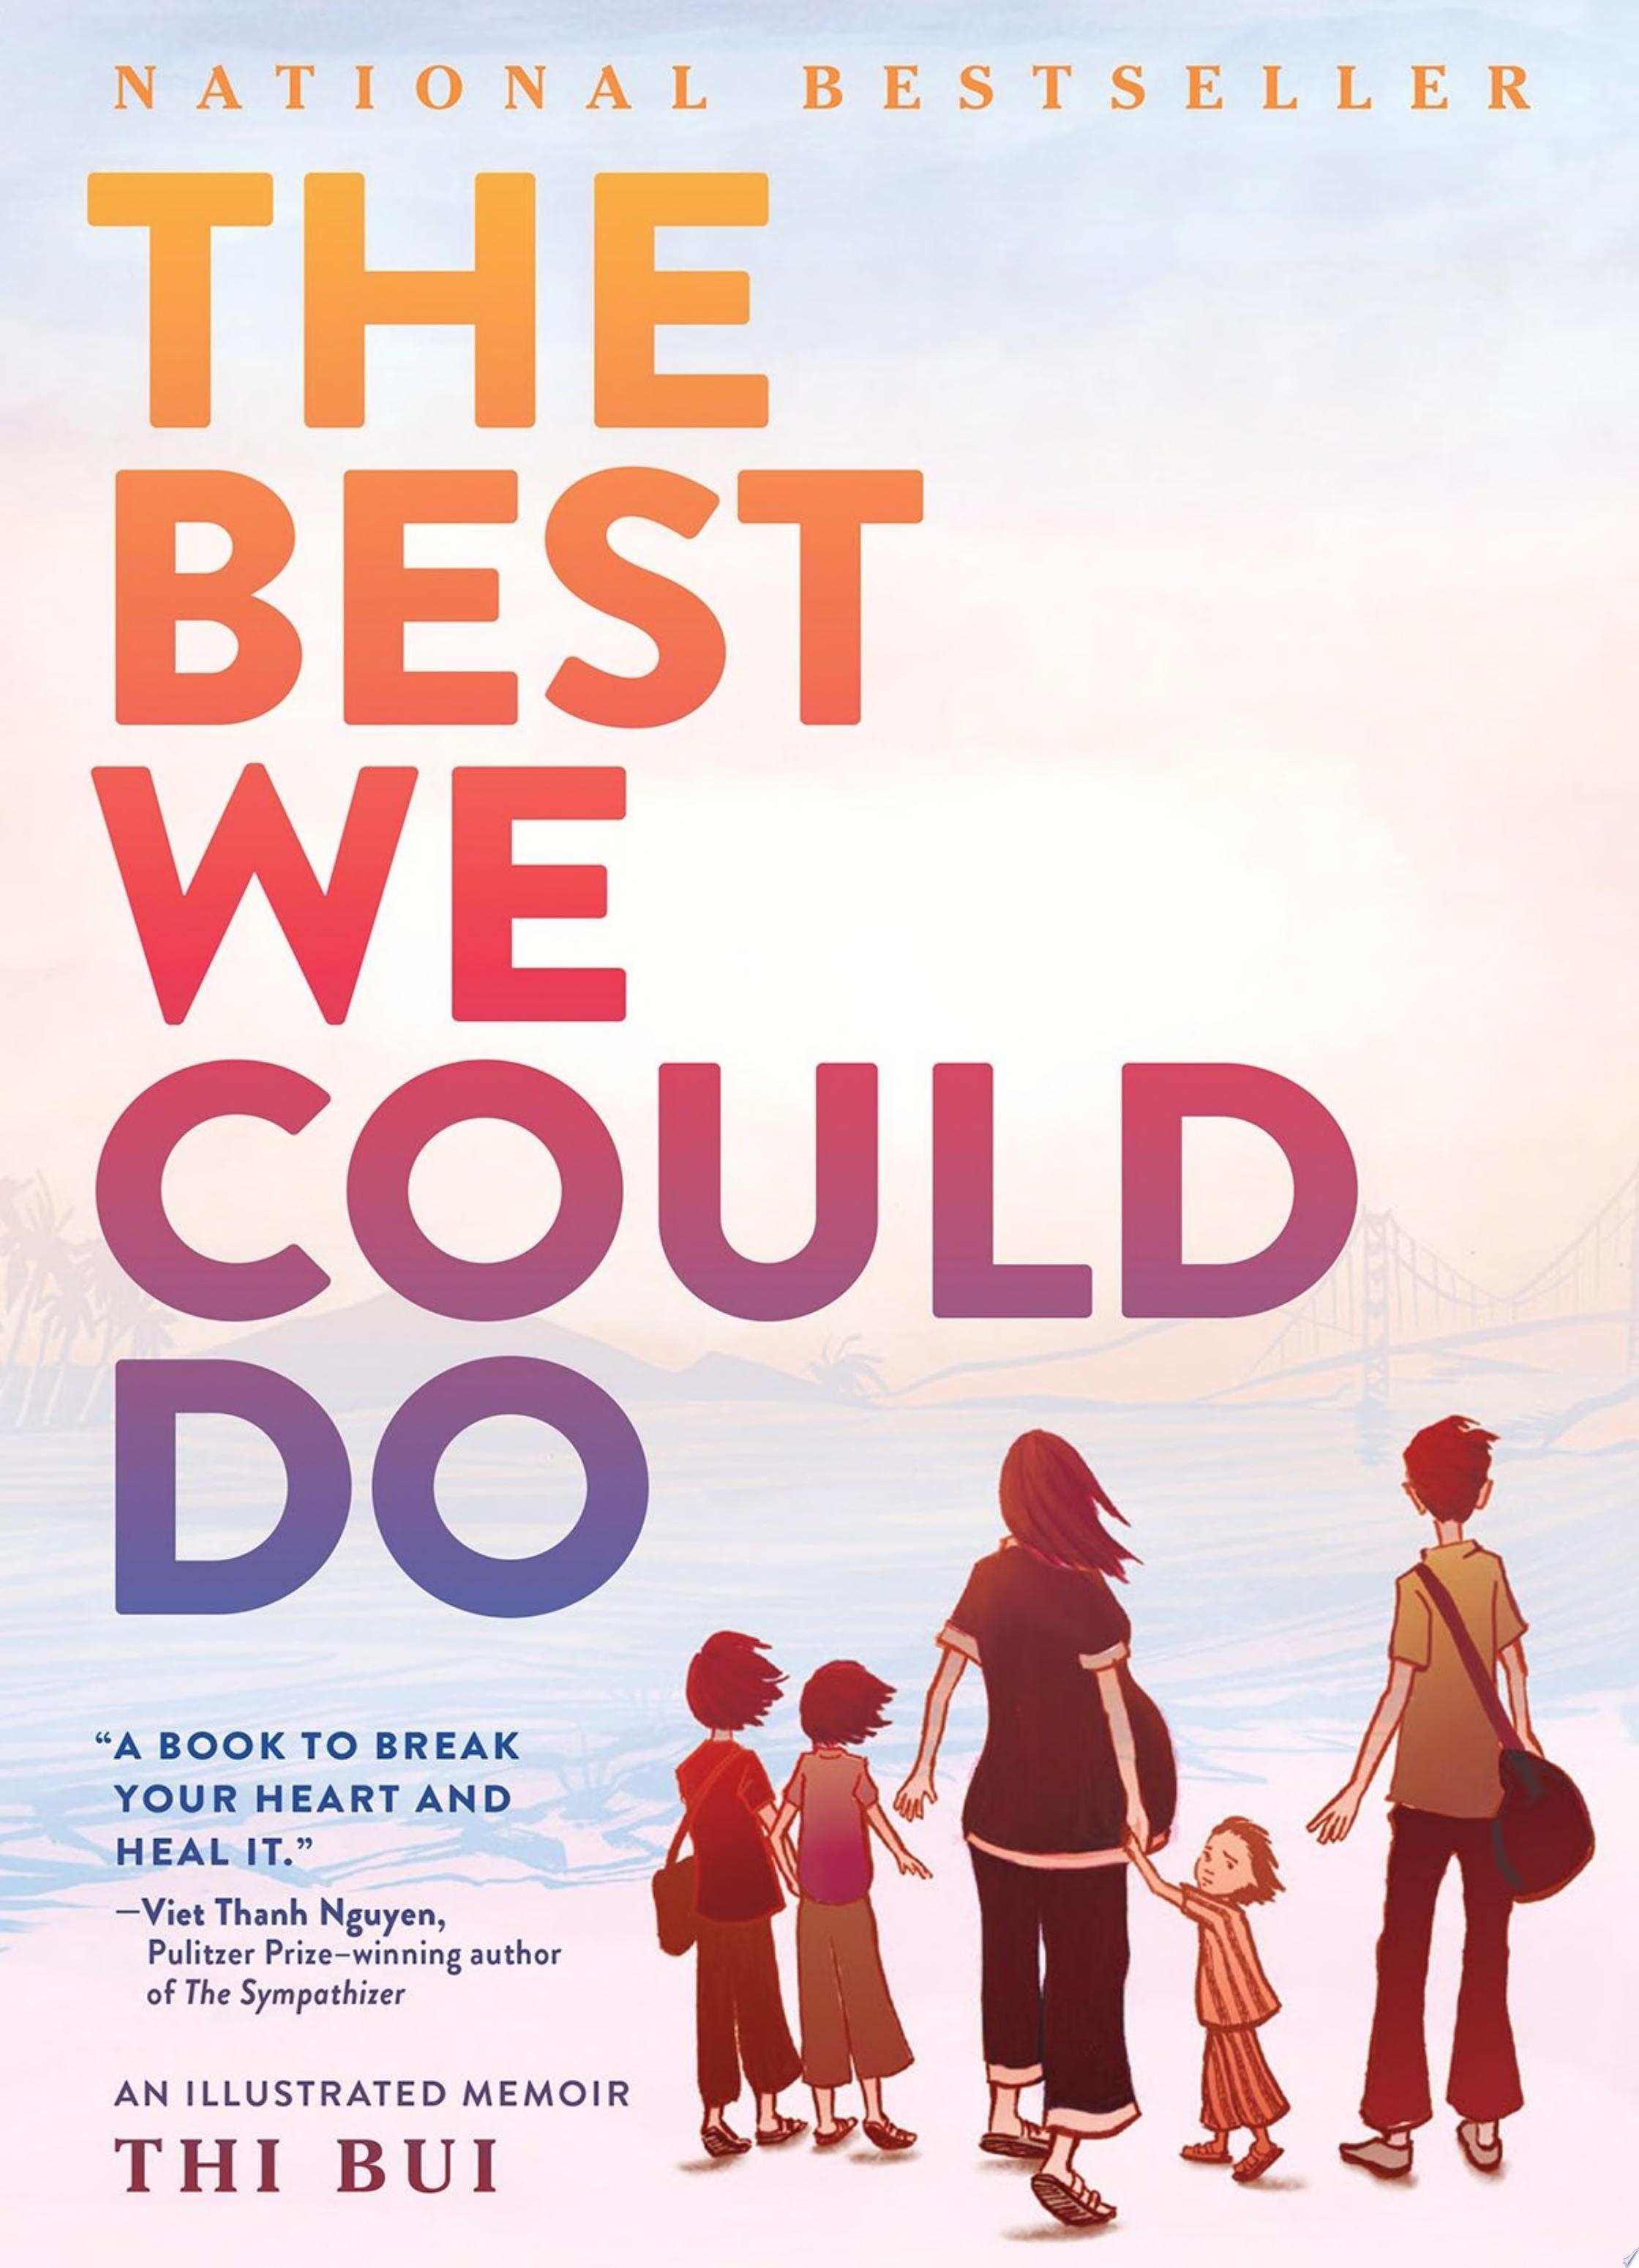 Image for "The Best We Could Do"